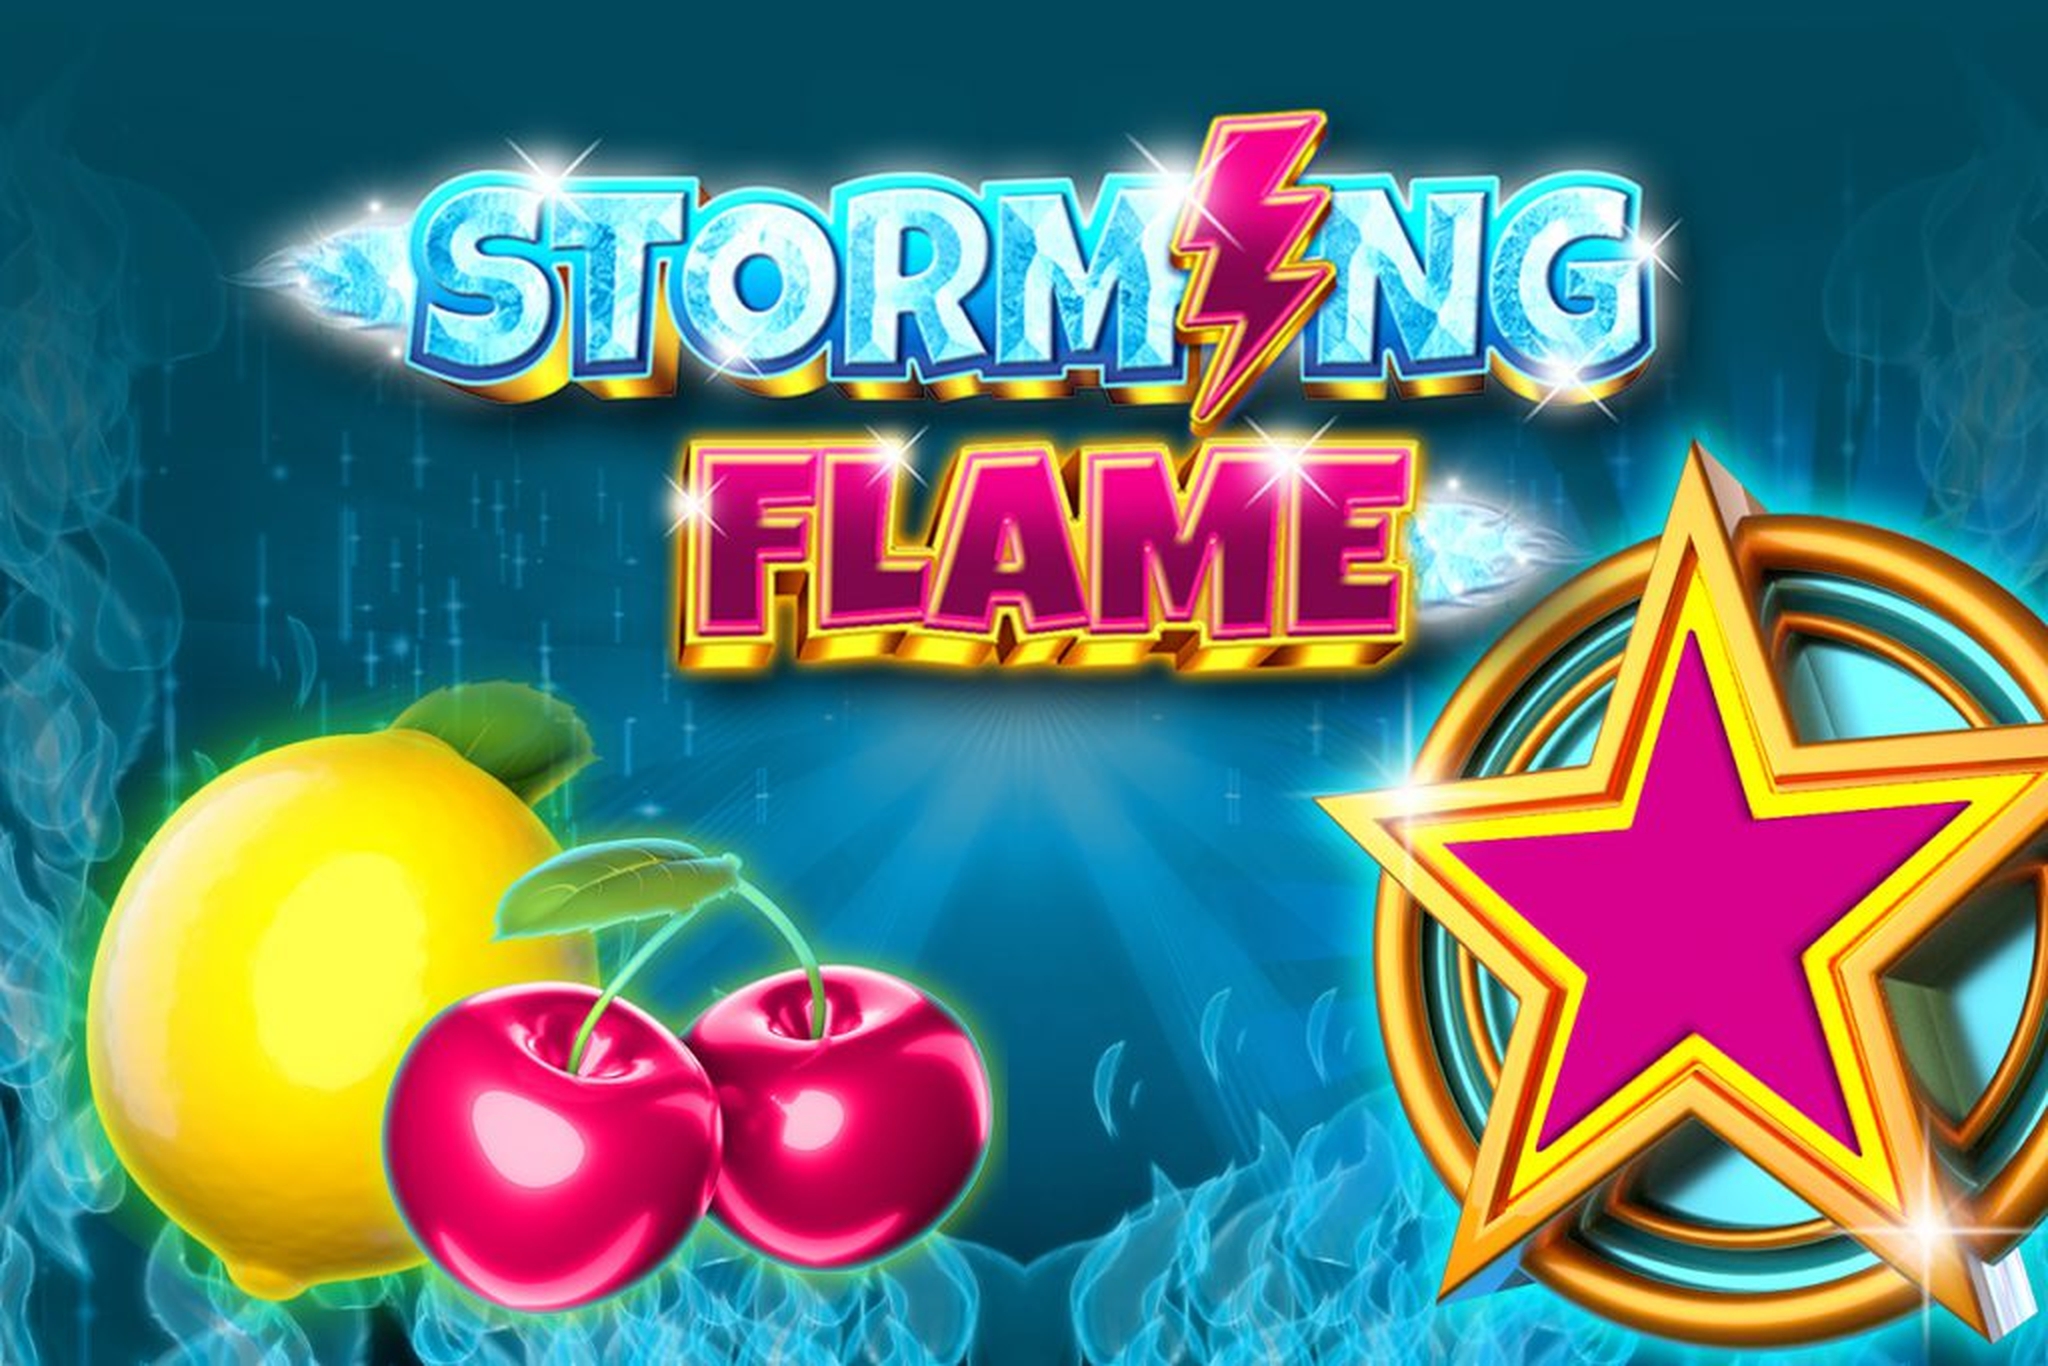 The Storming Flame Online Slot Demo Game by GameArt